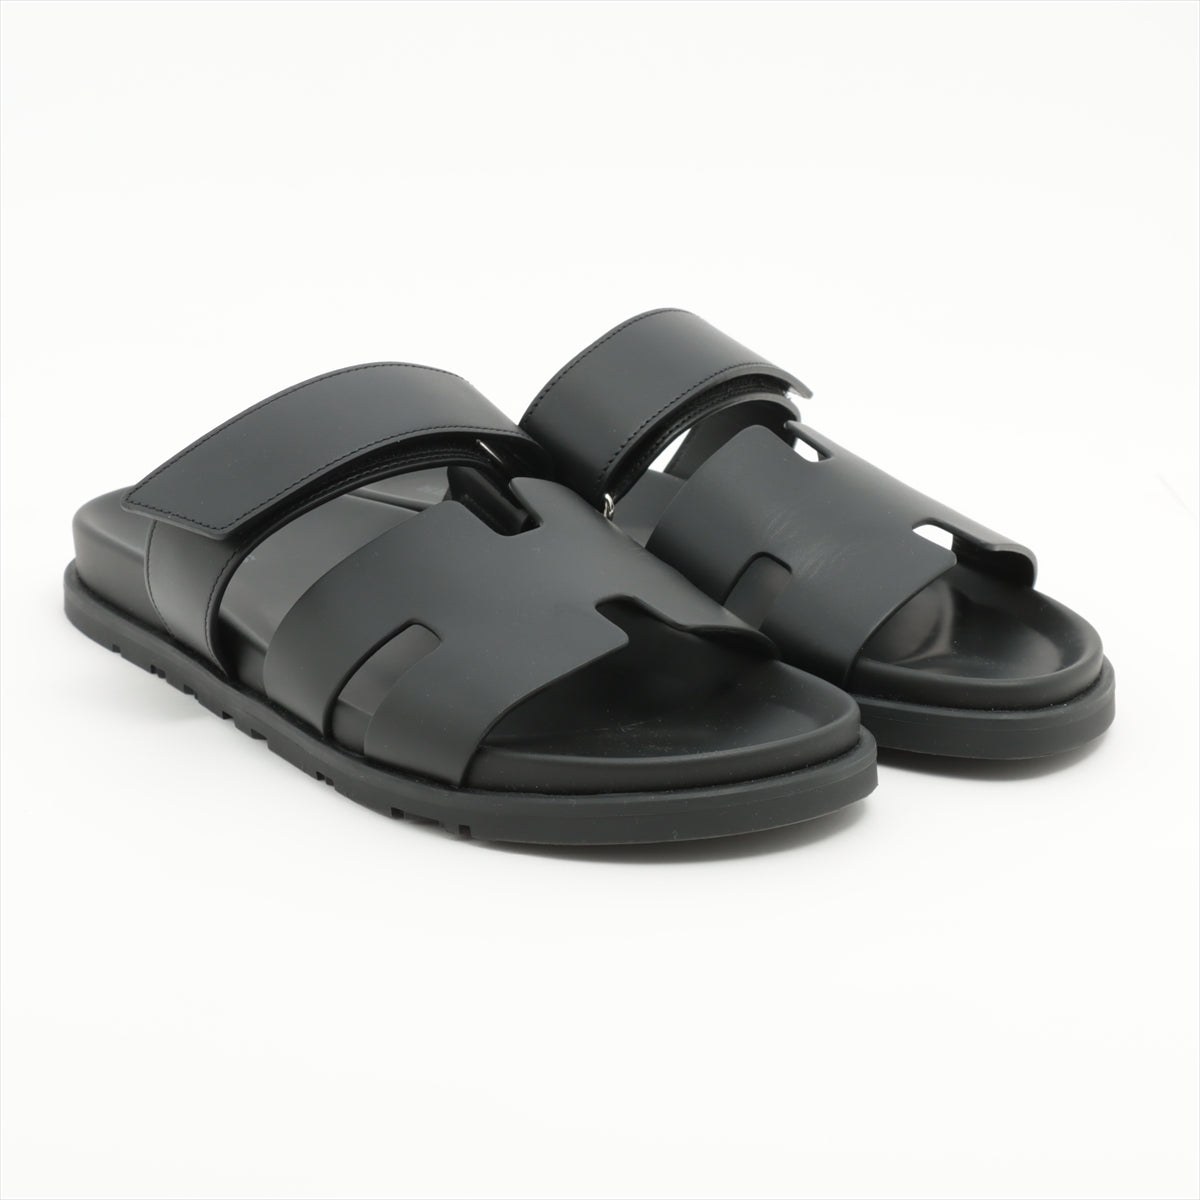 Hermès Cypre Leather Sandals 41 Men's Black box There is a bag